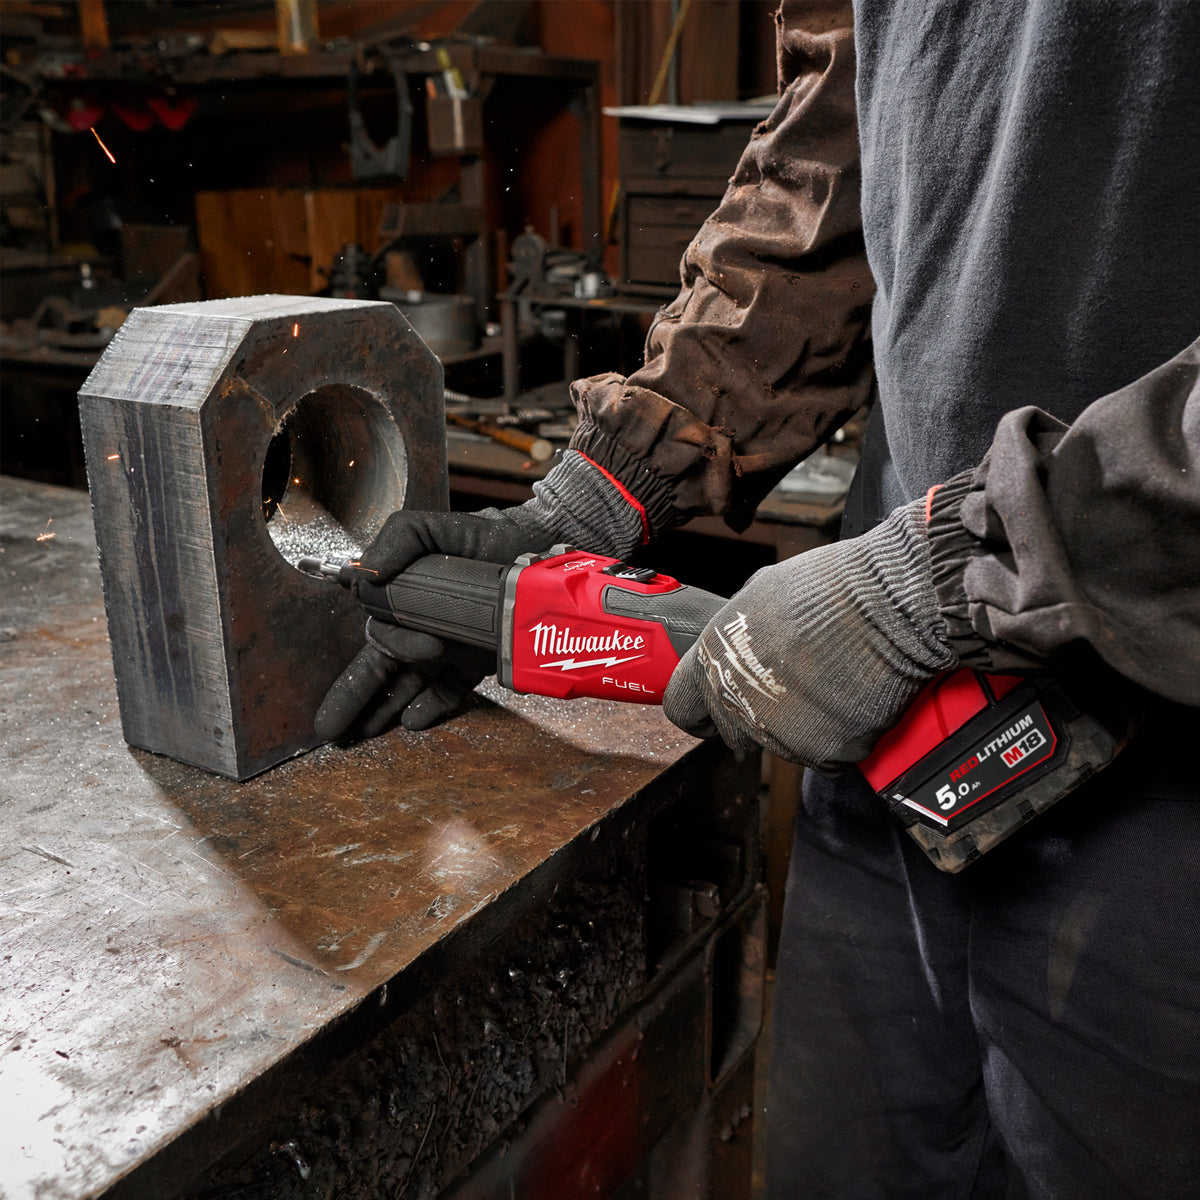 Milwaukee M18 FDGRB-0 18V Brushless Braking Die Grinder with 2 x 5.0Ah Battery & Charger